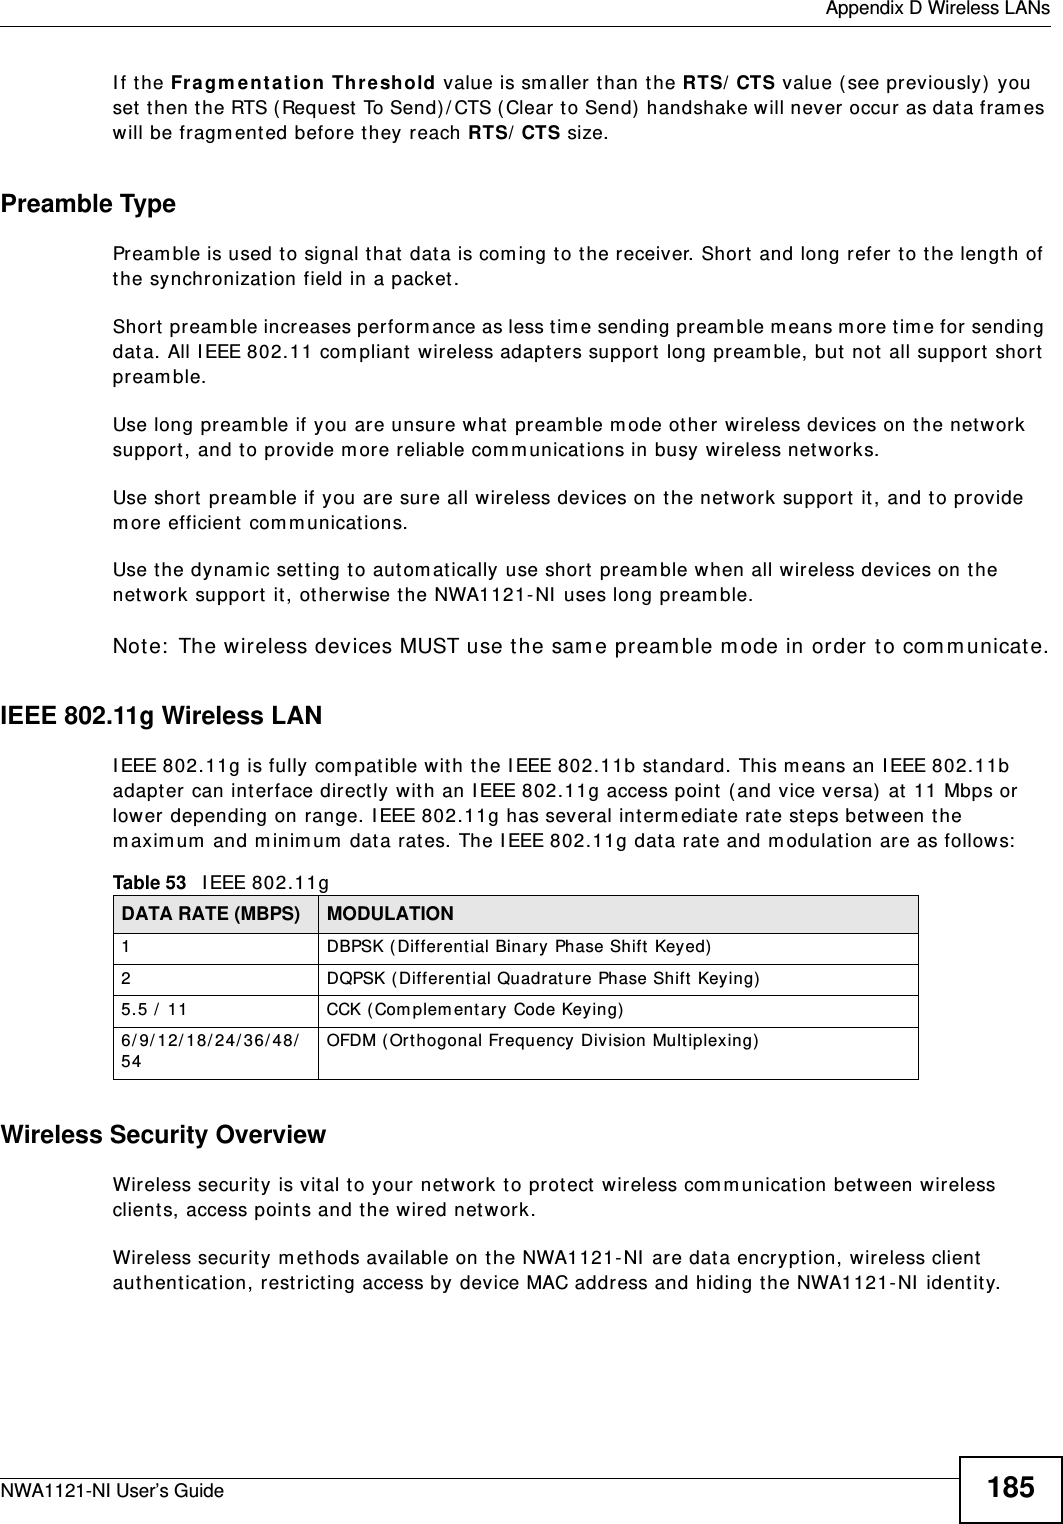  Appendix D Wireless LANsNWA1121-NI User’s Guide 185If the Fragmentation Threshold value is smaller than the RTS/CTS value (see previously) you set then the RTS (Request To Send)/CTS (Clear to Send) handshake will never occur as data frames will be fragmented before they reach RTS/CTS size.Preamble TypePreamble is used to signal that data is coming to the receiver. Short and long refer to the length of the synchronization field in a packet.Short preamble increases performance as less time sending preamble means more time for sending data. All IEEE 802.11 compliant wireless adapters support long preamble, but not all support short preamble. Use long preamble if you are unsure what preamble mode other wireless devices on the network support, and to provide more reliable communications in busy wireless networks. Use short preamble if you are sure all wireless devices on the network support it, and to provide more efficient communications.Use the dynamic setting to automatically use short preamble when all wireless devices on the network support it, otherwise the NWA1121-NI uses long preamble.Note: The wireless devices MUST use the same preamble mode in order to communicate.IEEE 802.11g Wireless LANIEEE 802.11g is fully compatible with the IEEE 802.11b standard. This means an IEEE 802.11b adapter can interface directly with an IEEE 802.11g access point (and vice versa) at 11 Mbps or lower depending on range. IEEE 802.11g has several intermediate rate steps between the maximum and minimum data rates. The IEEE 802.11g data rate and modulation are as follows:Wireless Security OverviewWireless security is vital to your network to protect wireless communication between wireless clients, access points and the wired network.Wireless security methods available on the NWA1121-NI are data encryption, wireless client authentication, restricting access by device MAC address and hiding the NWA1121-NI identity.Table 53   IEEE 802.11gDATA RATE (MBPS) MODULATION1 DBPSK (Differential Binary Phase Shift Keyed)2 DQPSK (Differential Quadrature Phase Shift Keying)5.5 / 11 CCK (Complementary Code Keying) 6/9/12/18/24/36/48/54 OFDM (Orthogonal Frequency Division Multiplexing) 